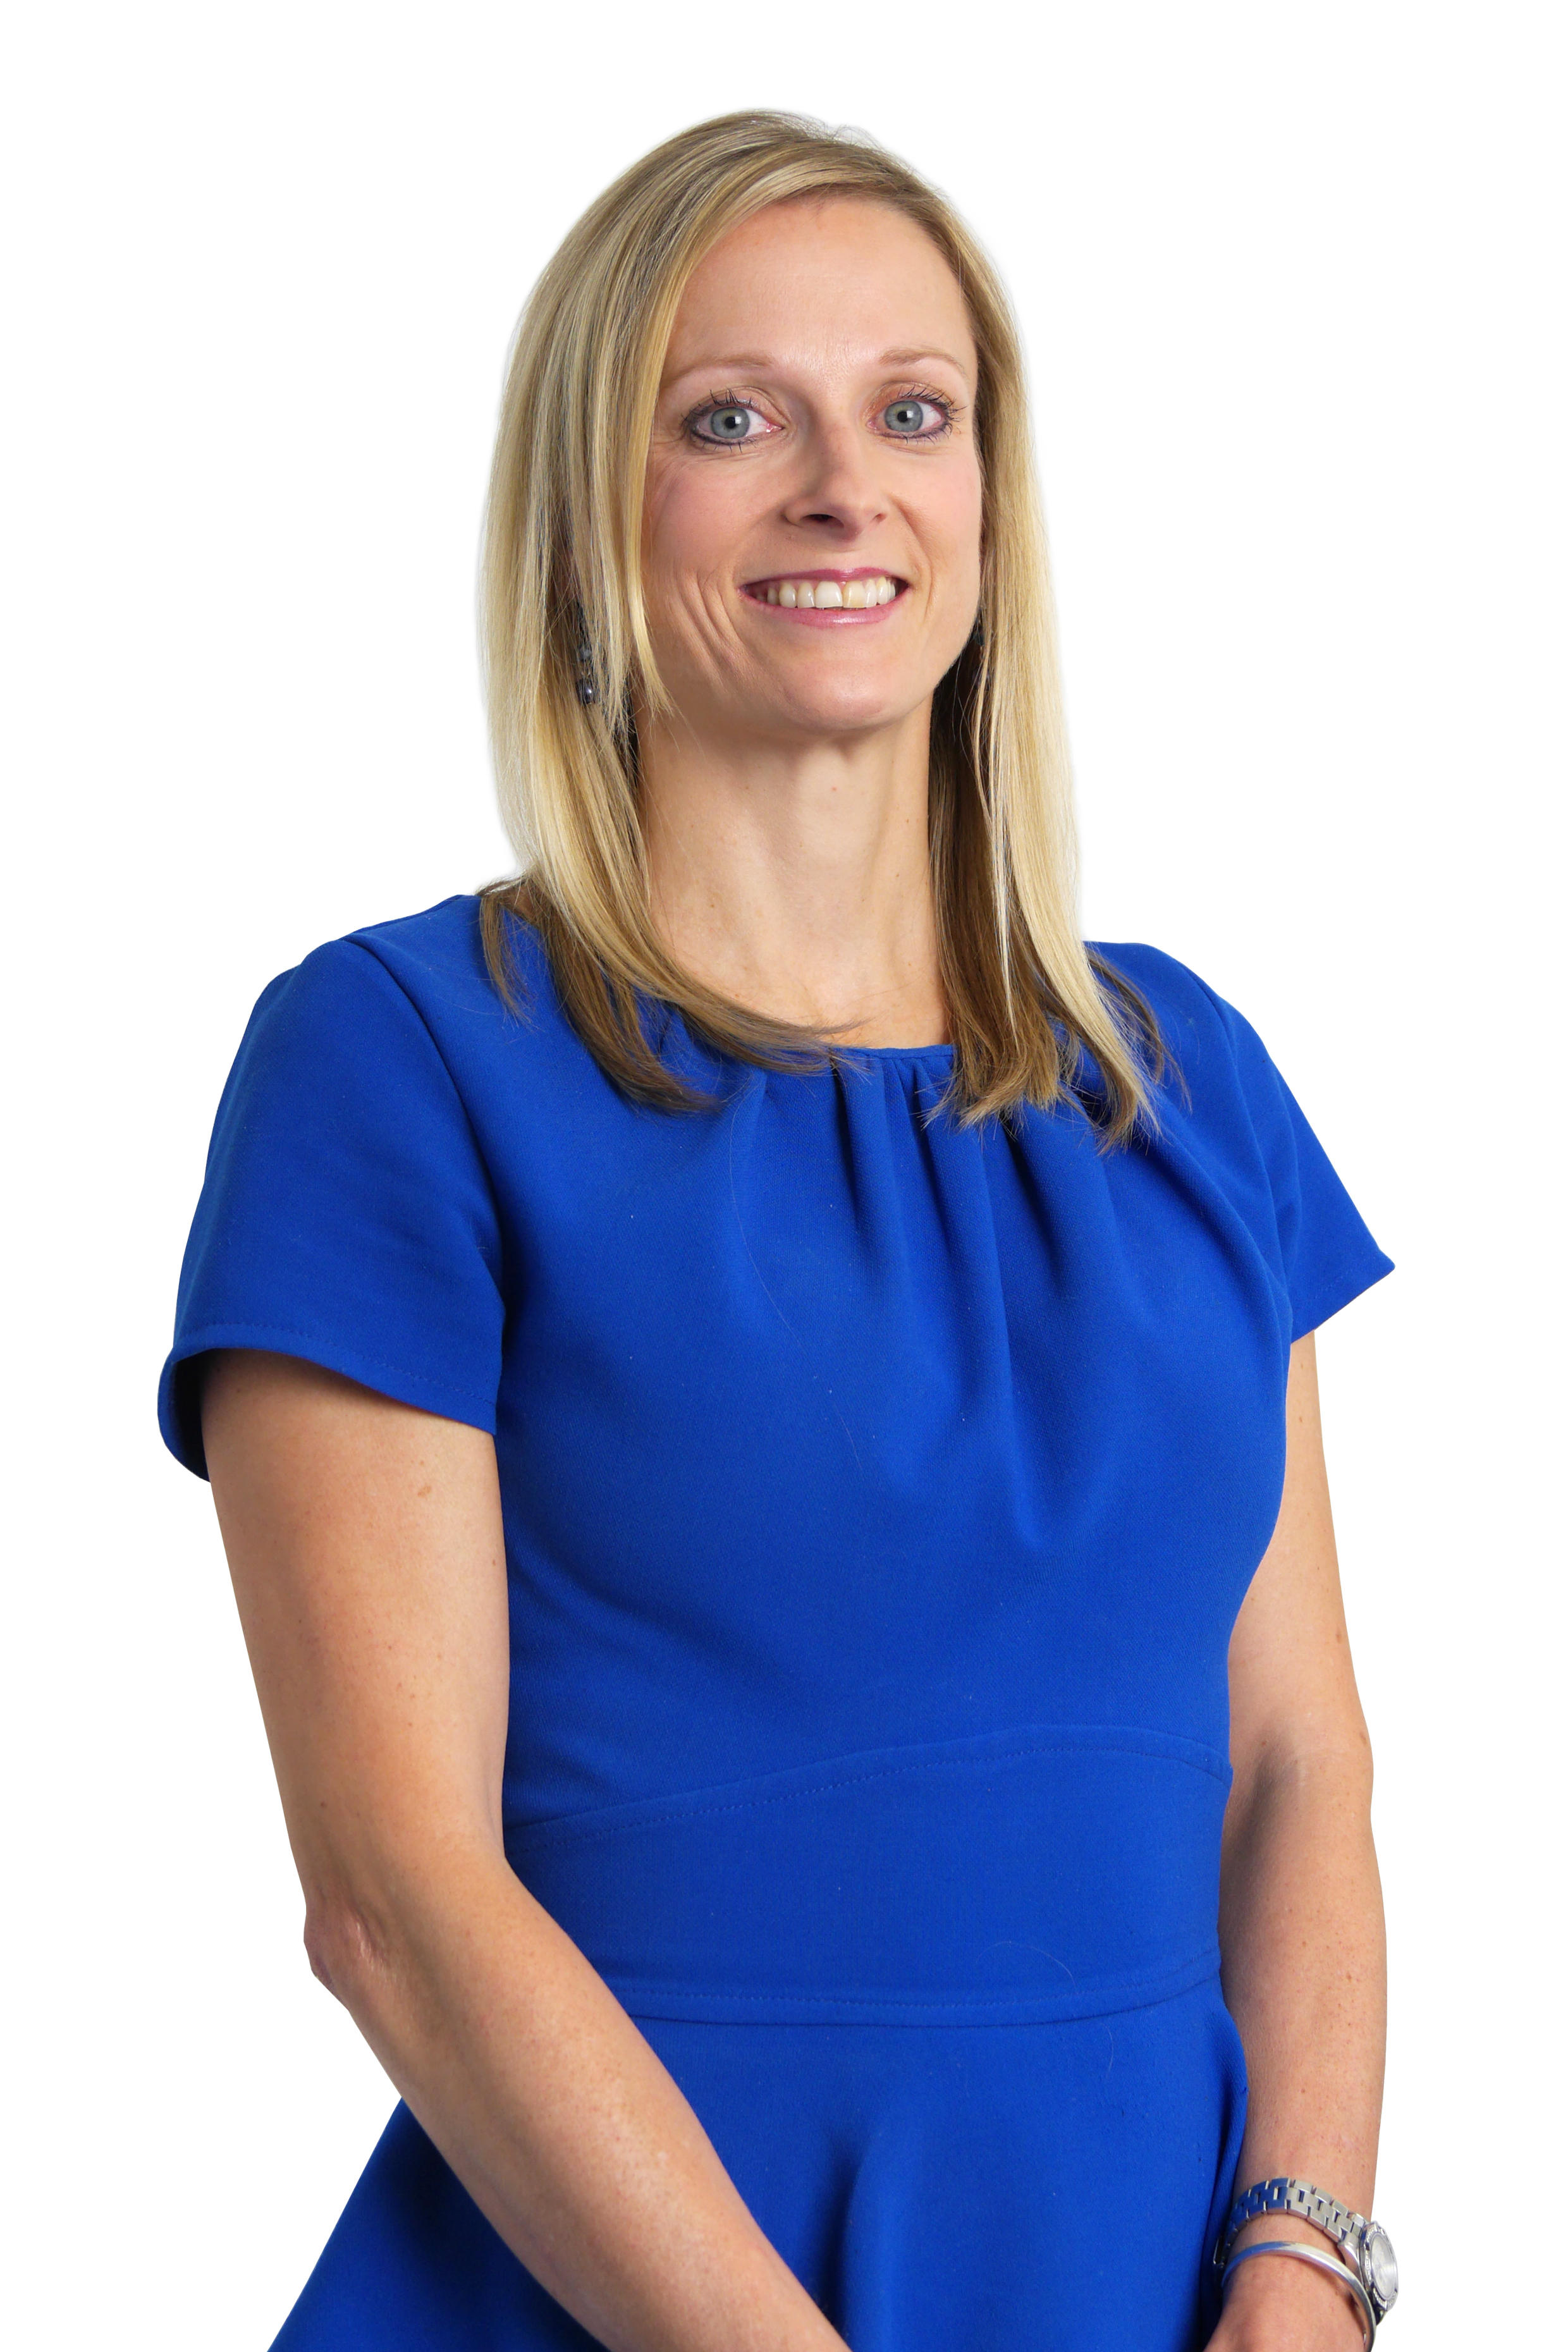 Aberdeen Standard Investments promotes Katie Trowsdale to head of multi-manager strategies